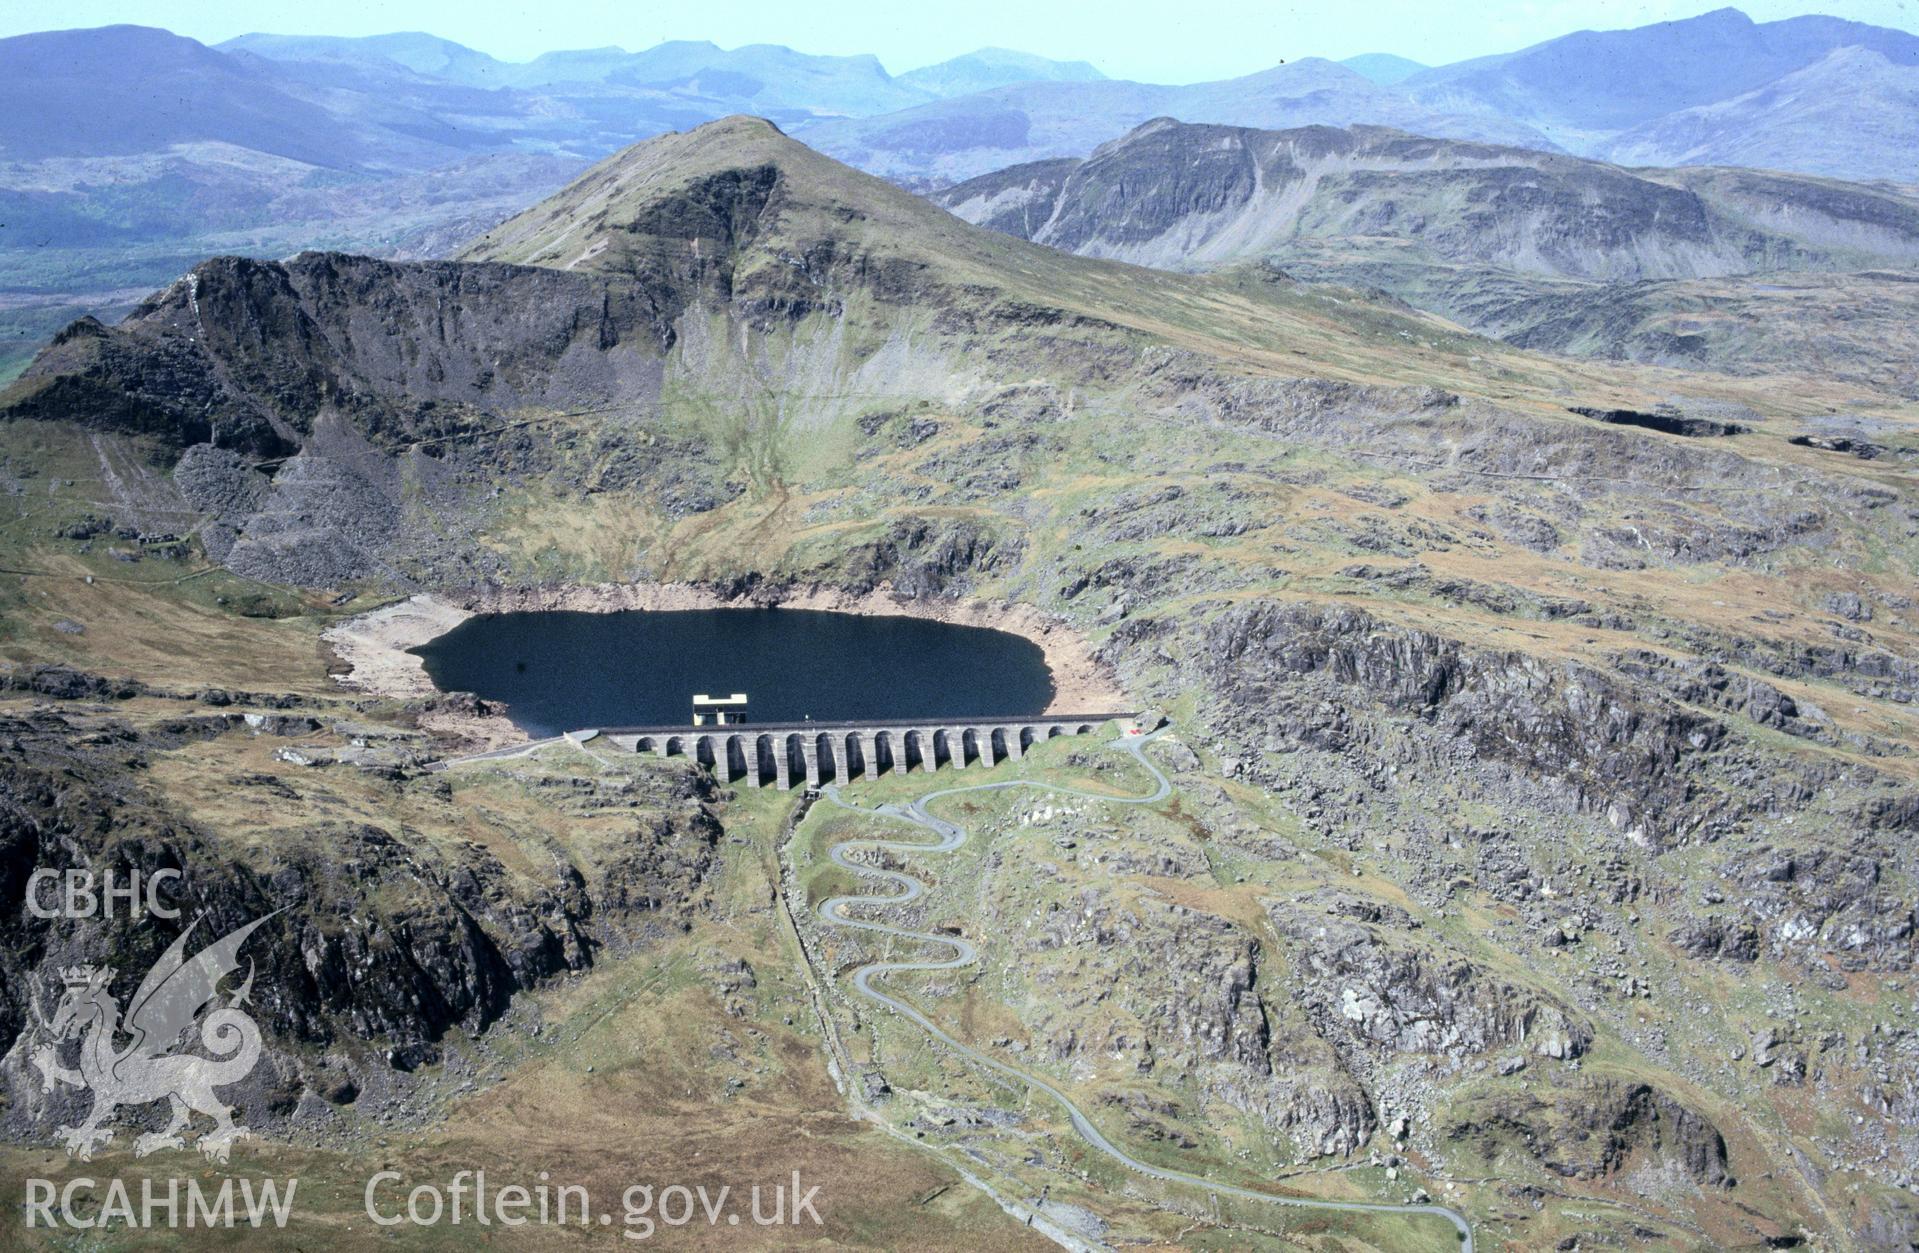 Slide of RCAHMW colour oblique aerial photograph of Llyn Stwlan Reservoir, taken by C.R. Musson, 4/5/1993.